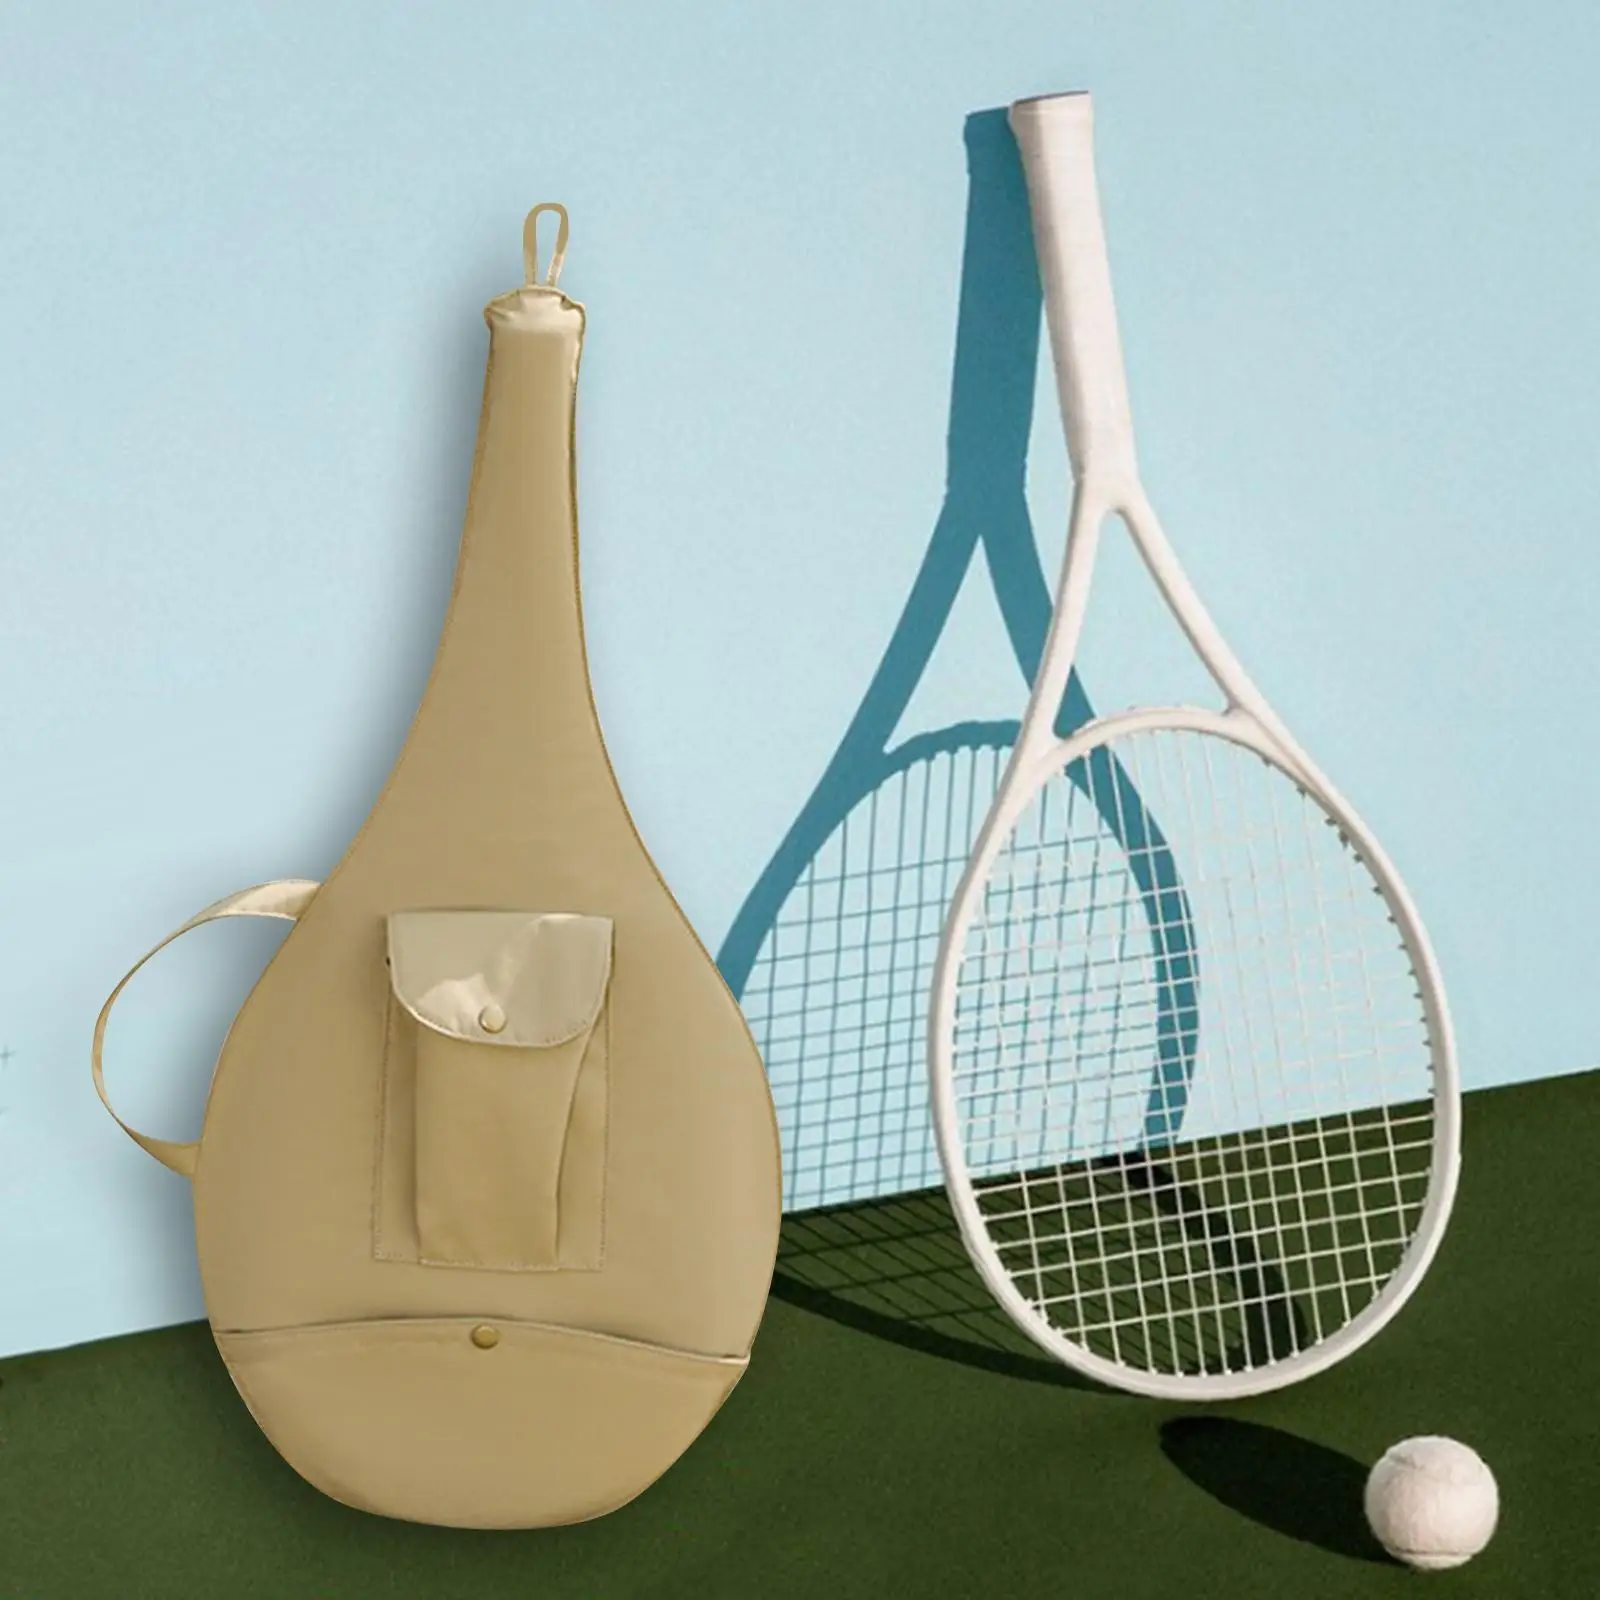 Tennis Racket Bag Adults with Storage Pocket Outdoor Sports Accessories Trendy Carrier Portable Players Detachable Shoulder Bag